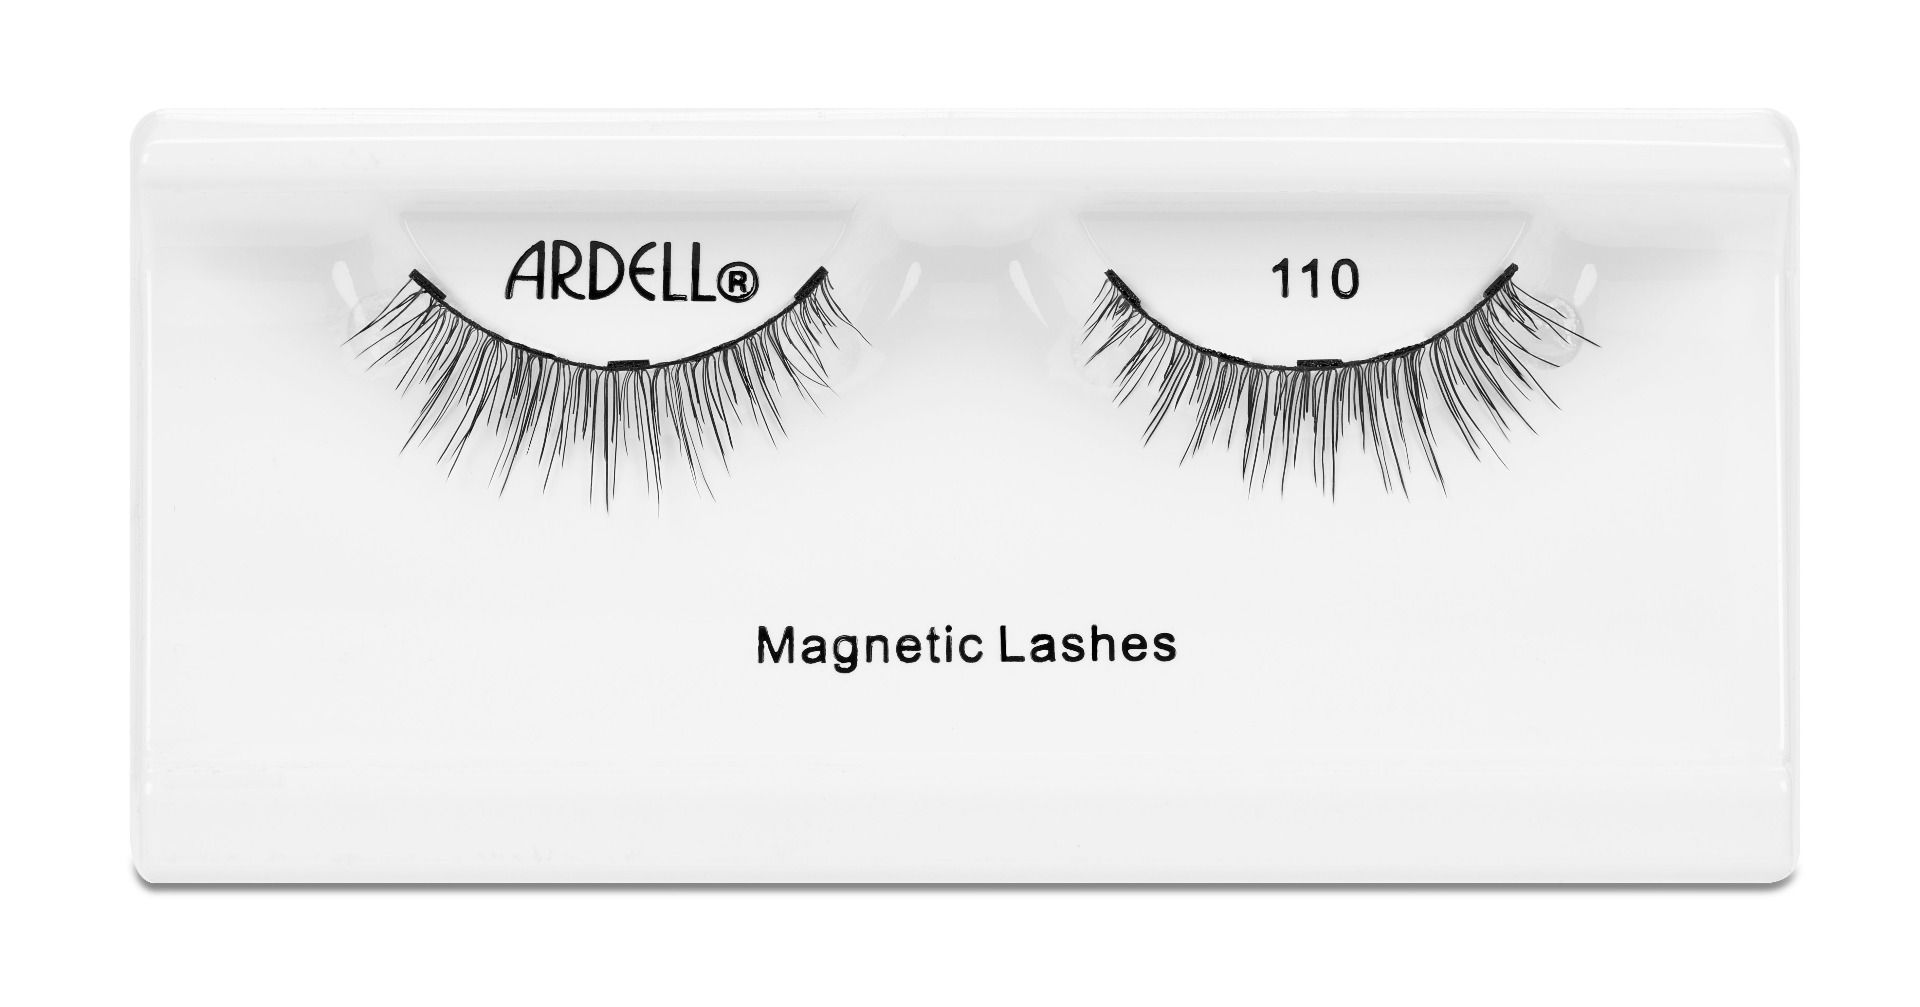 Set of Ardell, Magnetic Lash Singles, Lash 110 in inner packaging labelled with 